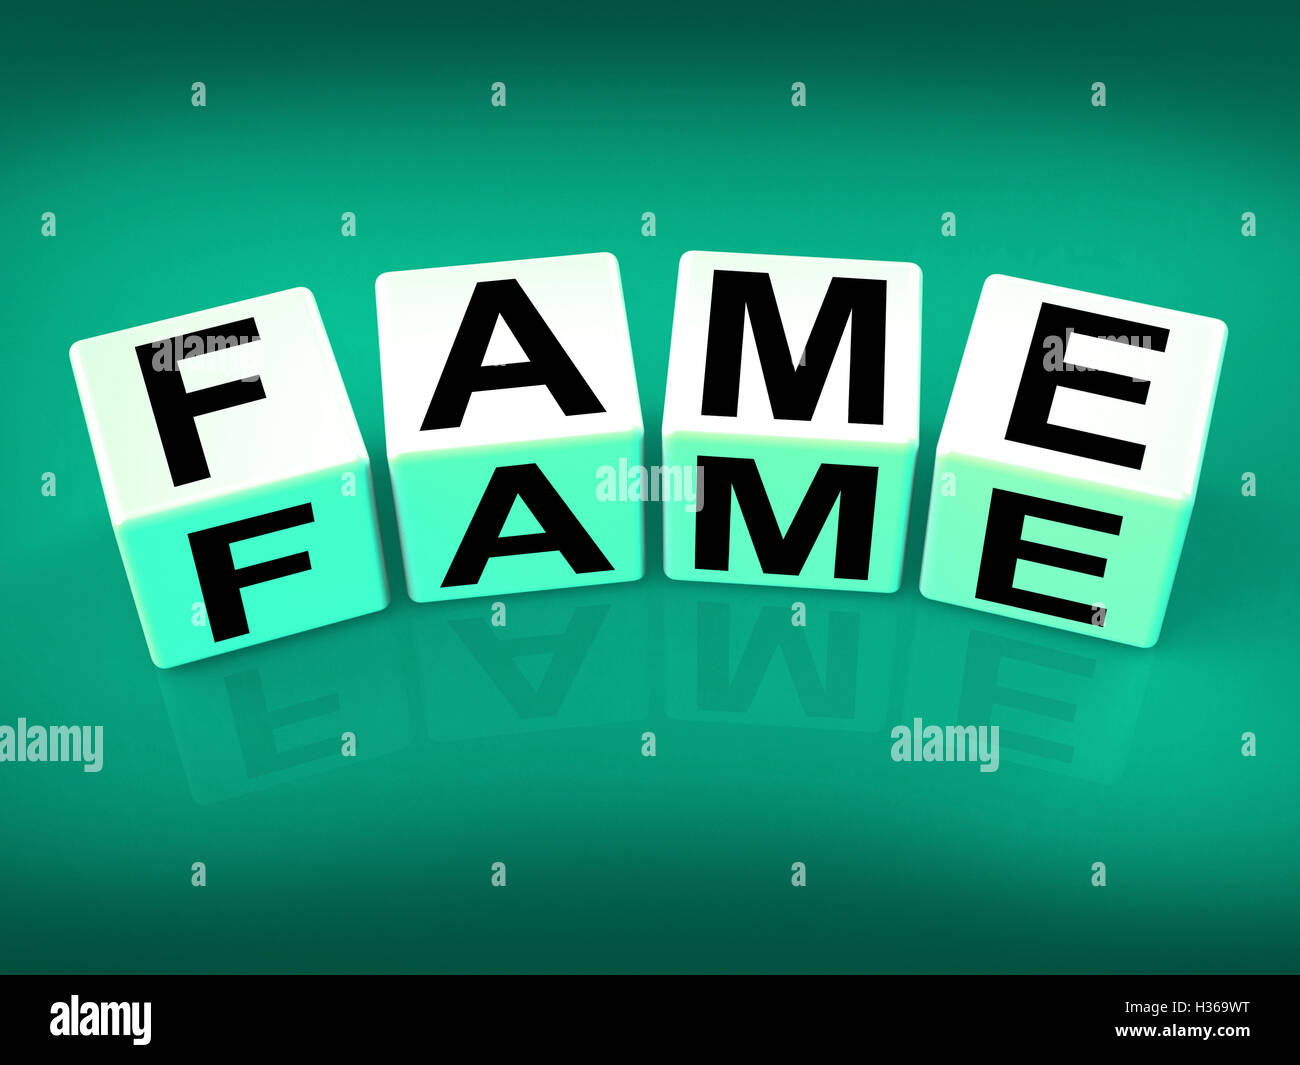 Fame Refers to Famous Renowned or Notable Celebrity Stock Photo